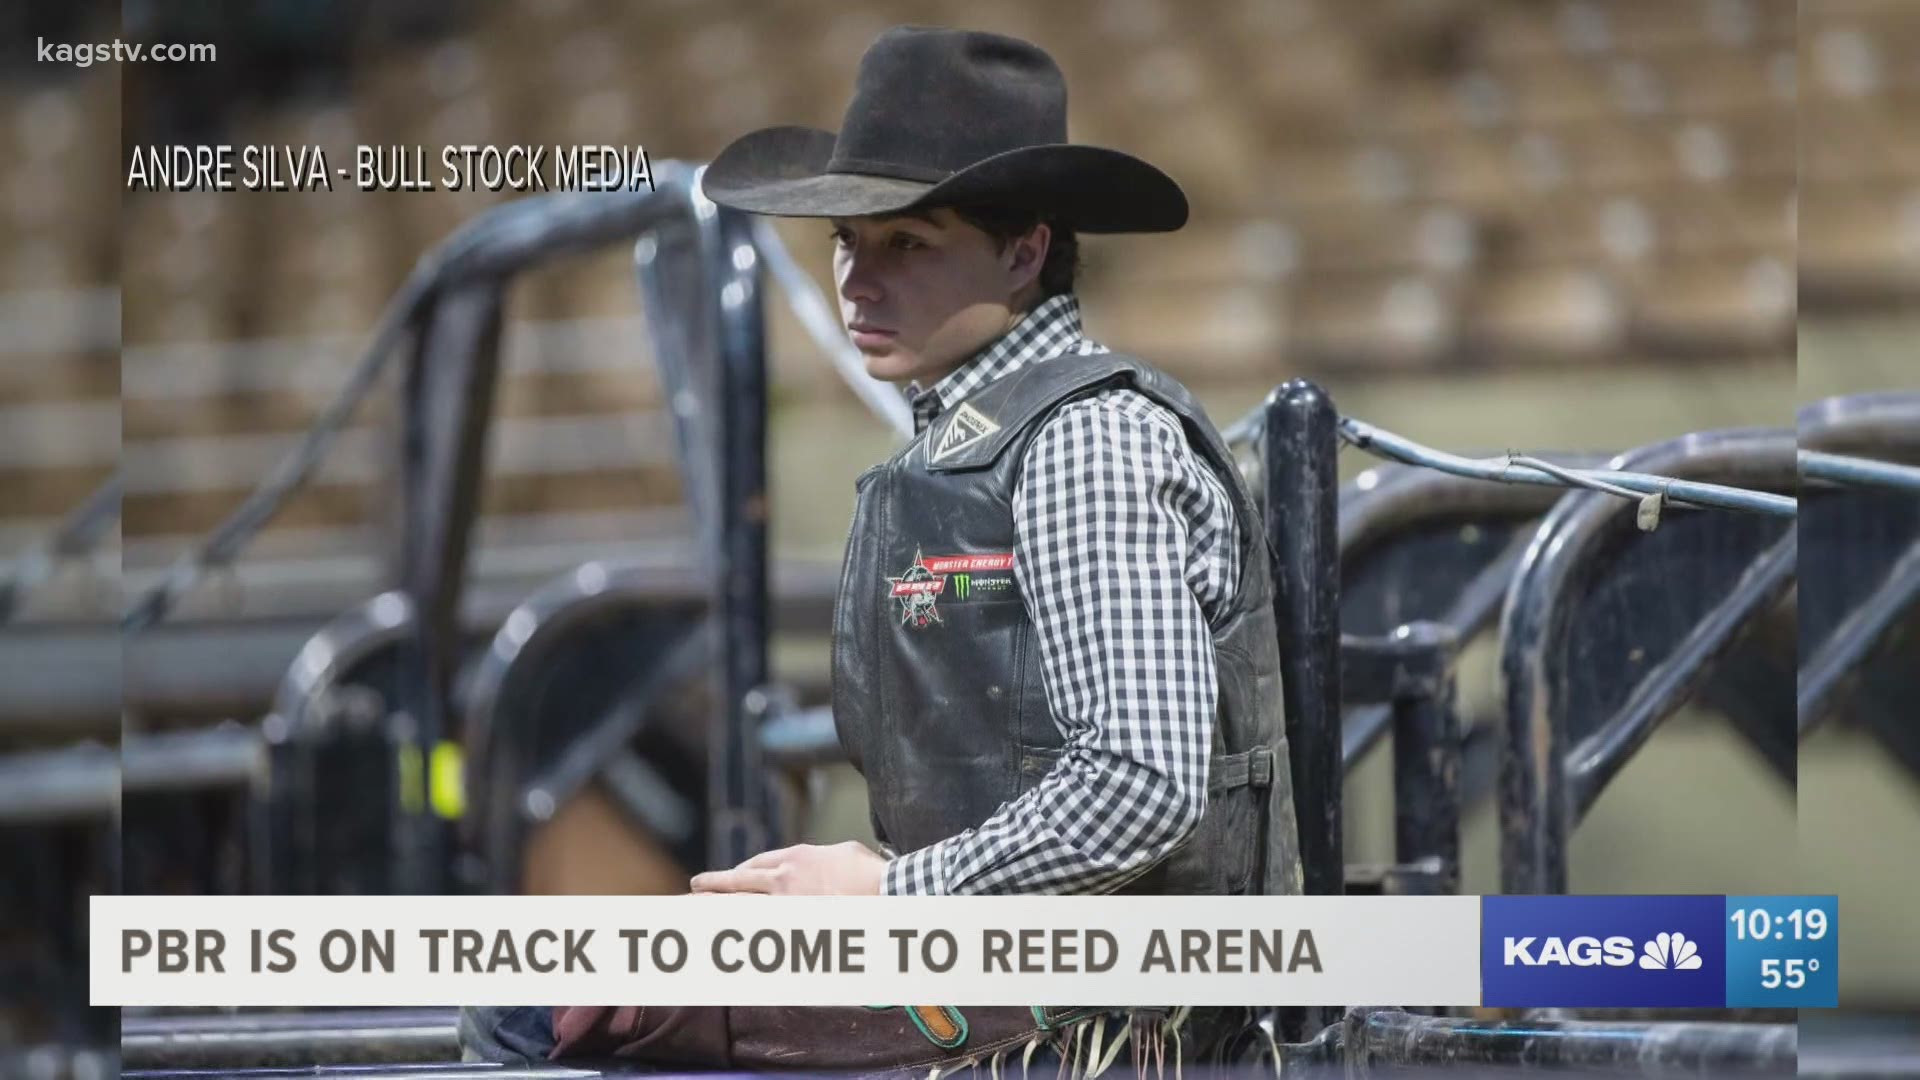 Professional Bull Riding is still on schedule to arrive at Reed Arena on April 9 and 10.